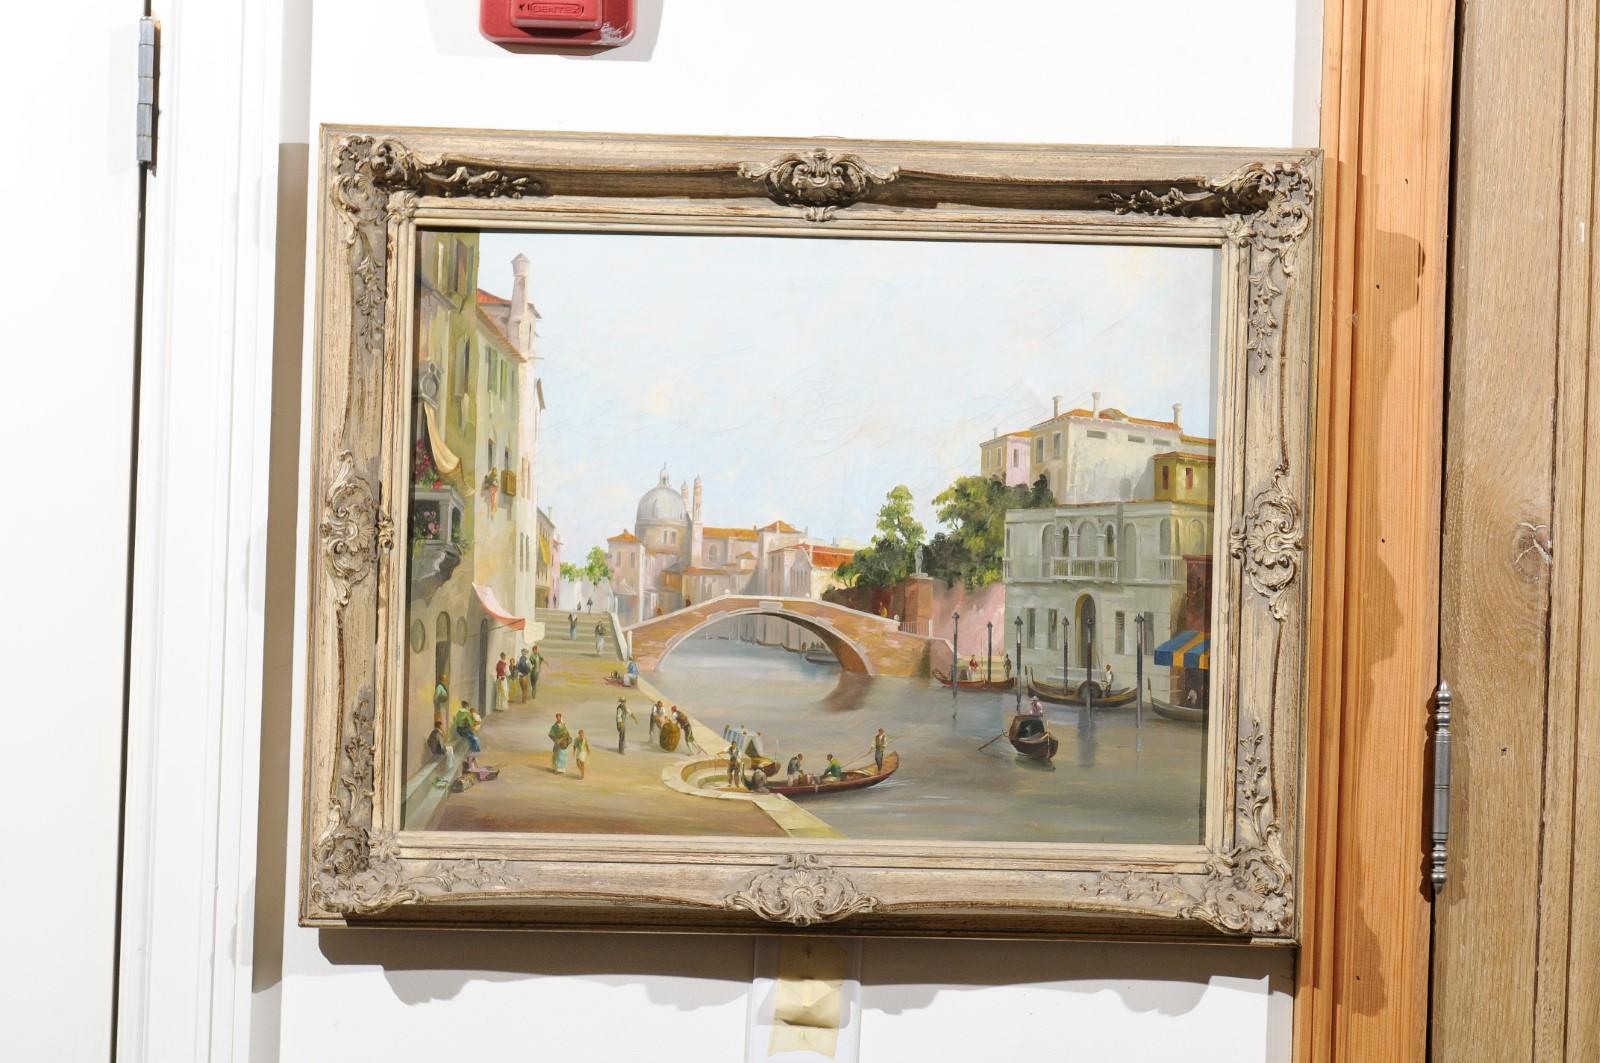 An English framed oil painting from the 19th century depicting a Venetian scene. Born in England during the 19th century, this charming oil painting depicts one of the many bridges that cross over the canals of the splendid Serenissima. Standing out